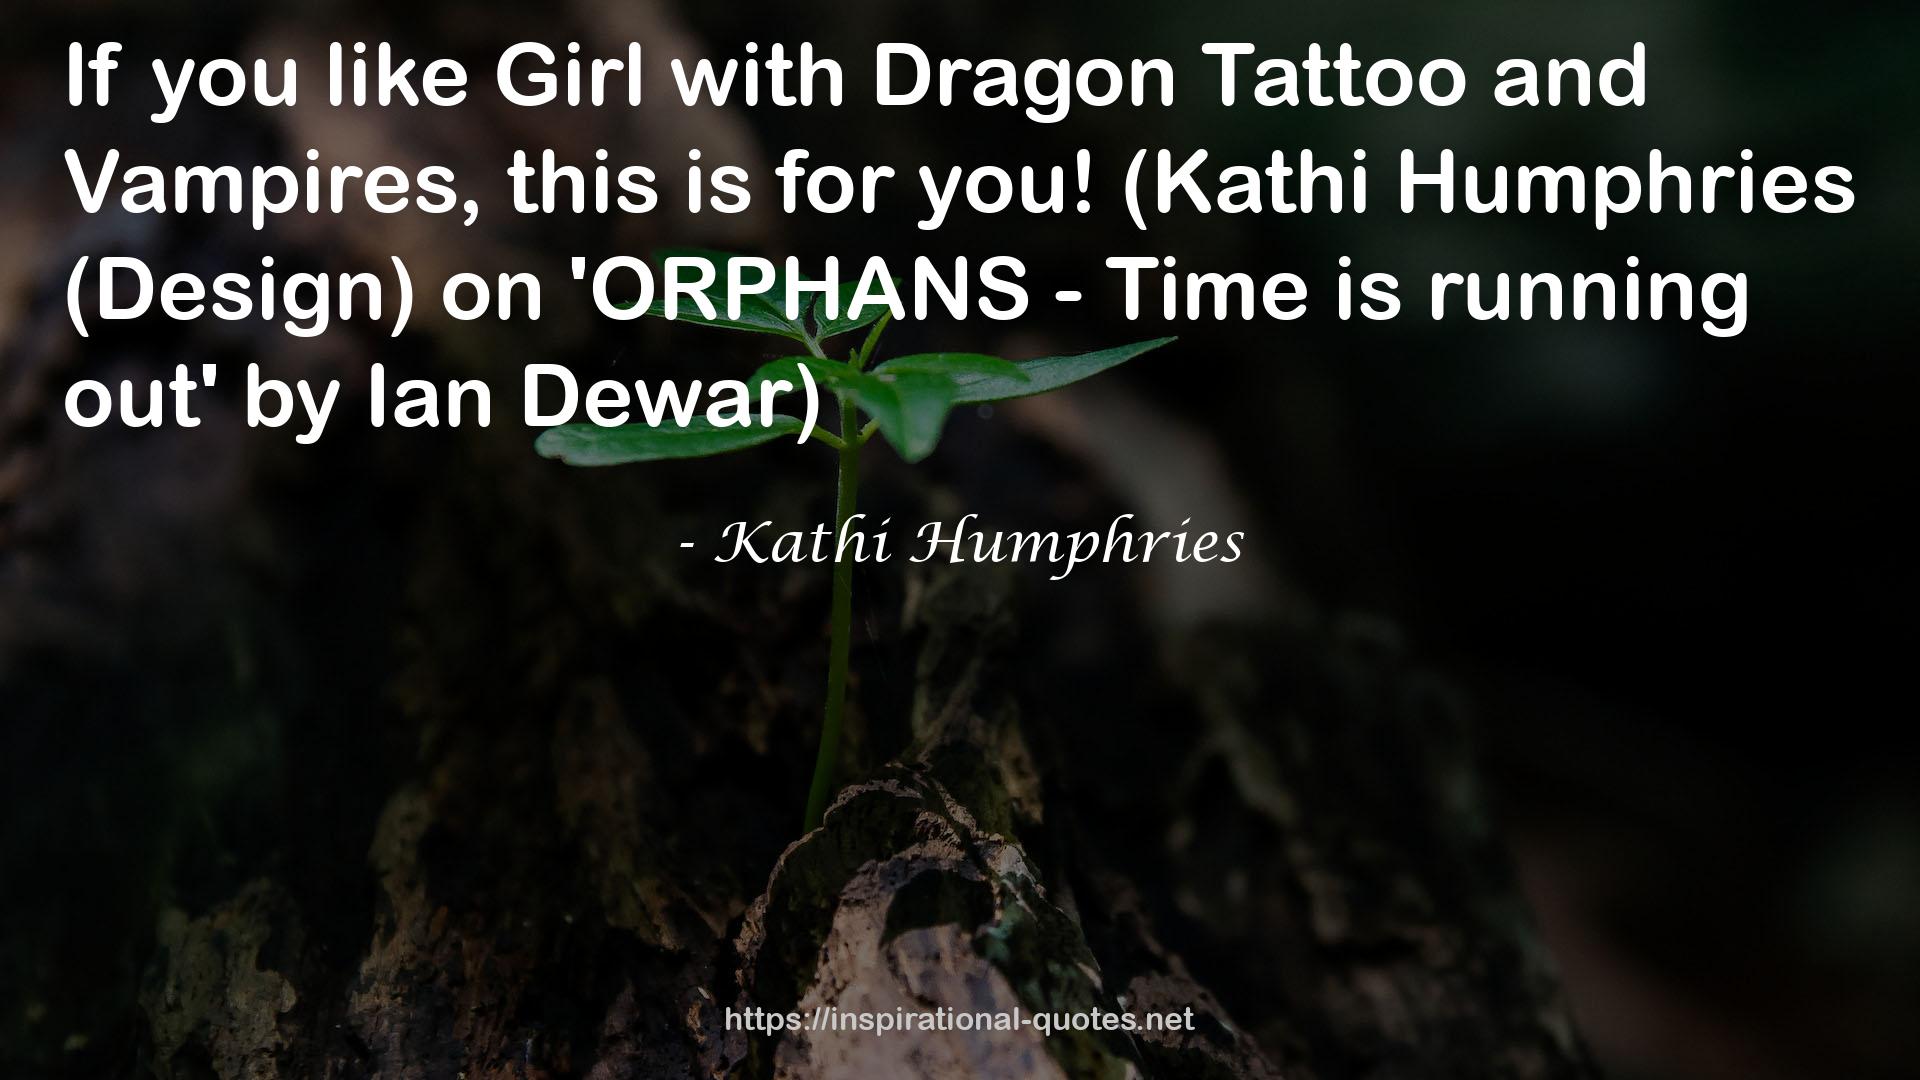 Kathi Humphries QUOTES